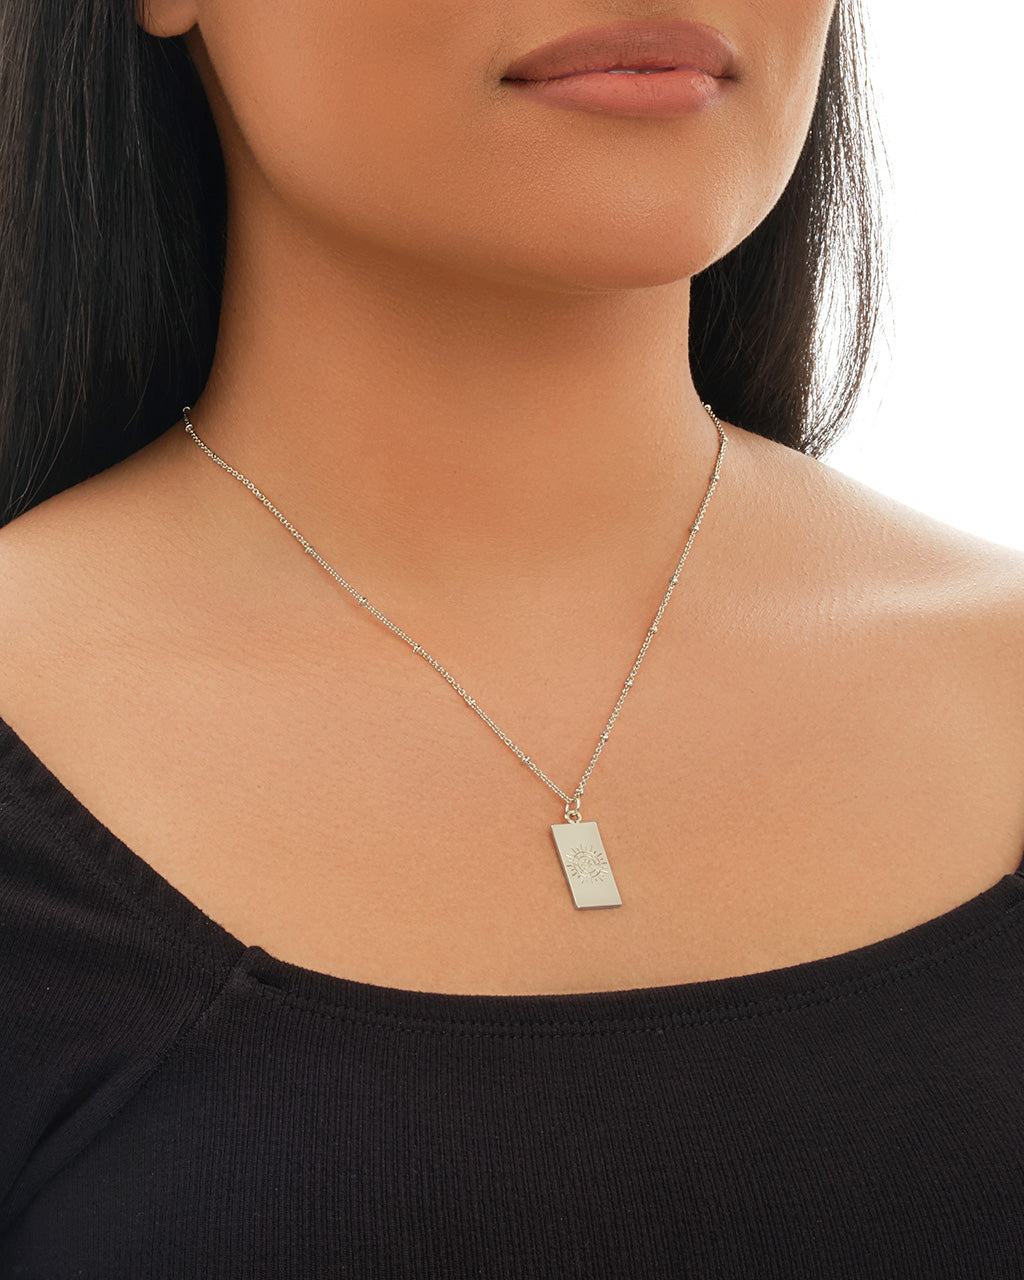 Personalized Tarot Card Necklace - GetNameNecklace